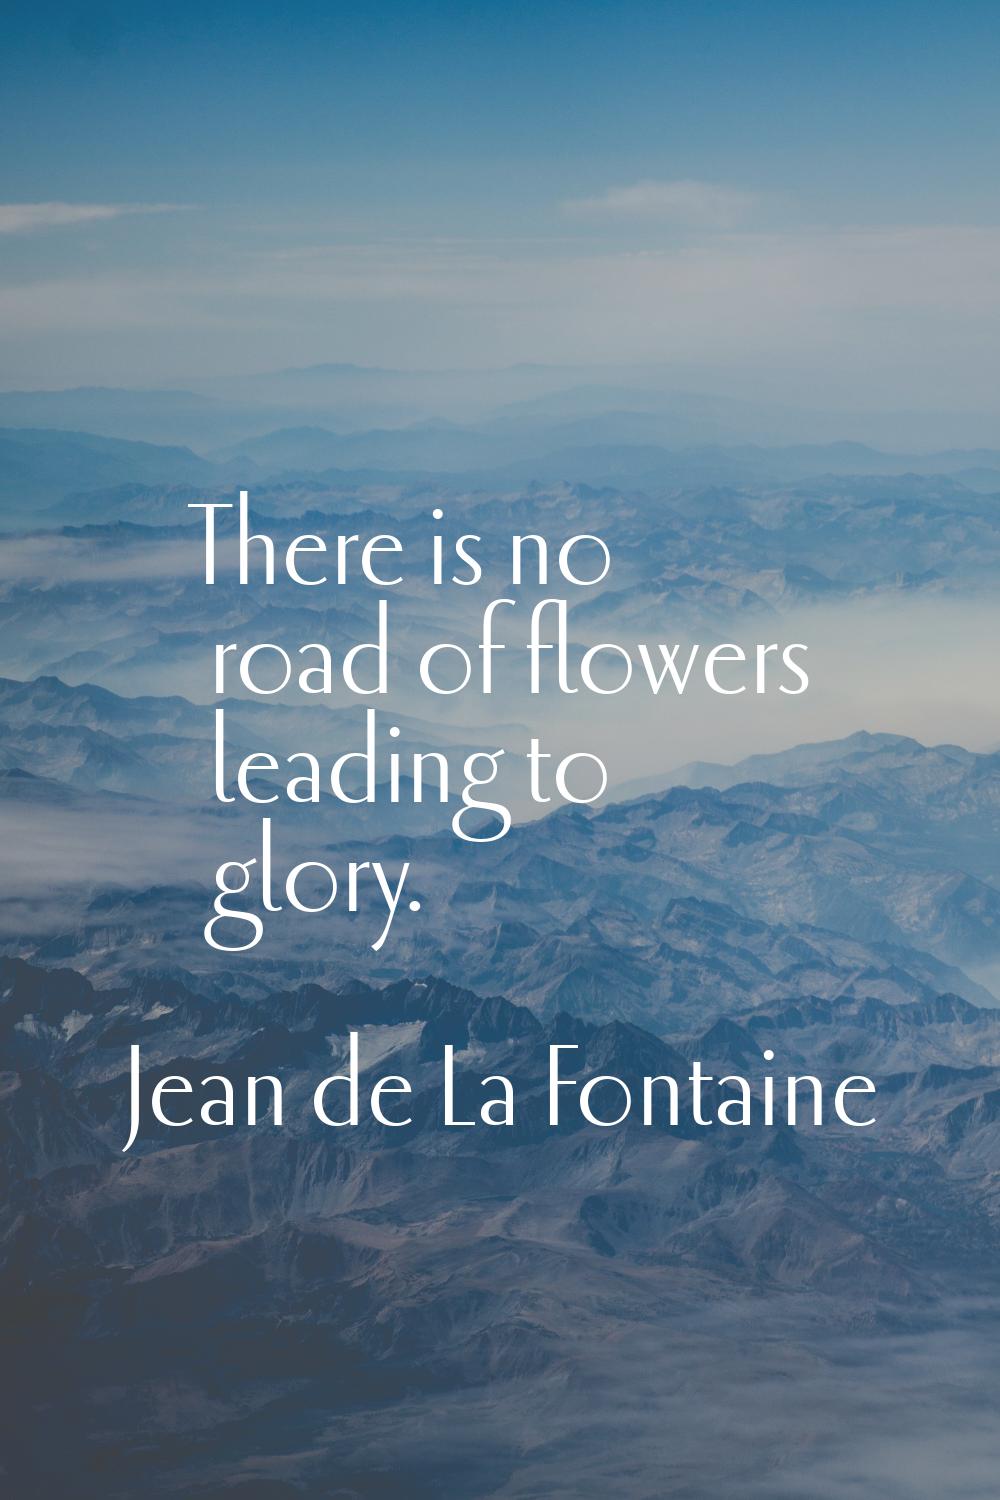 There is no road of flowers leading to glory.